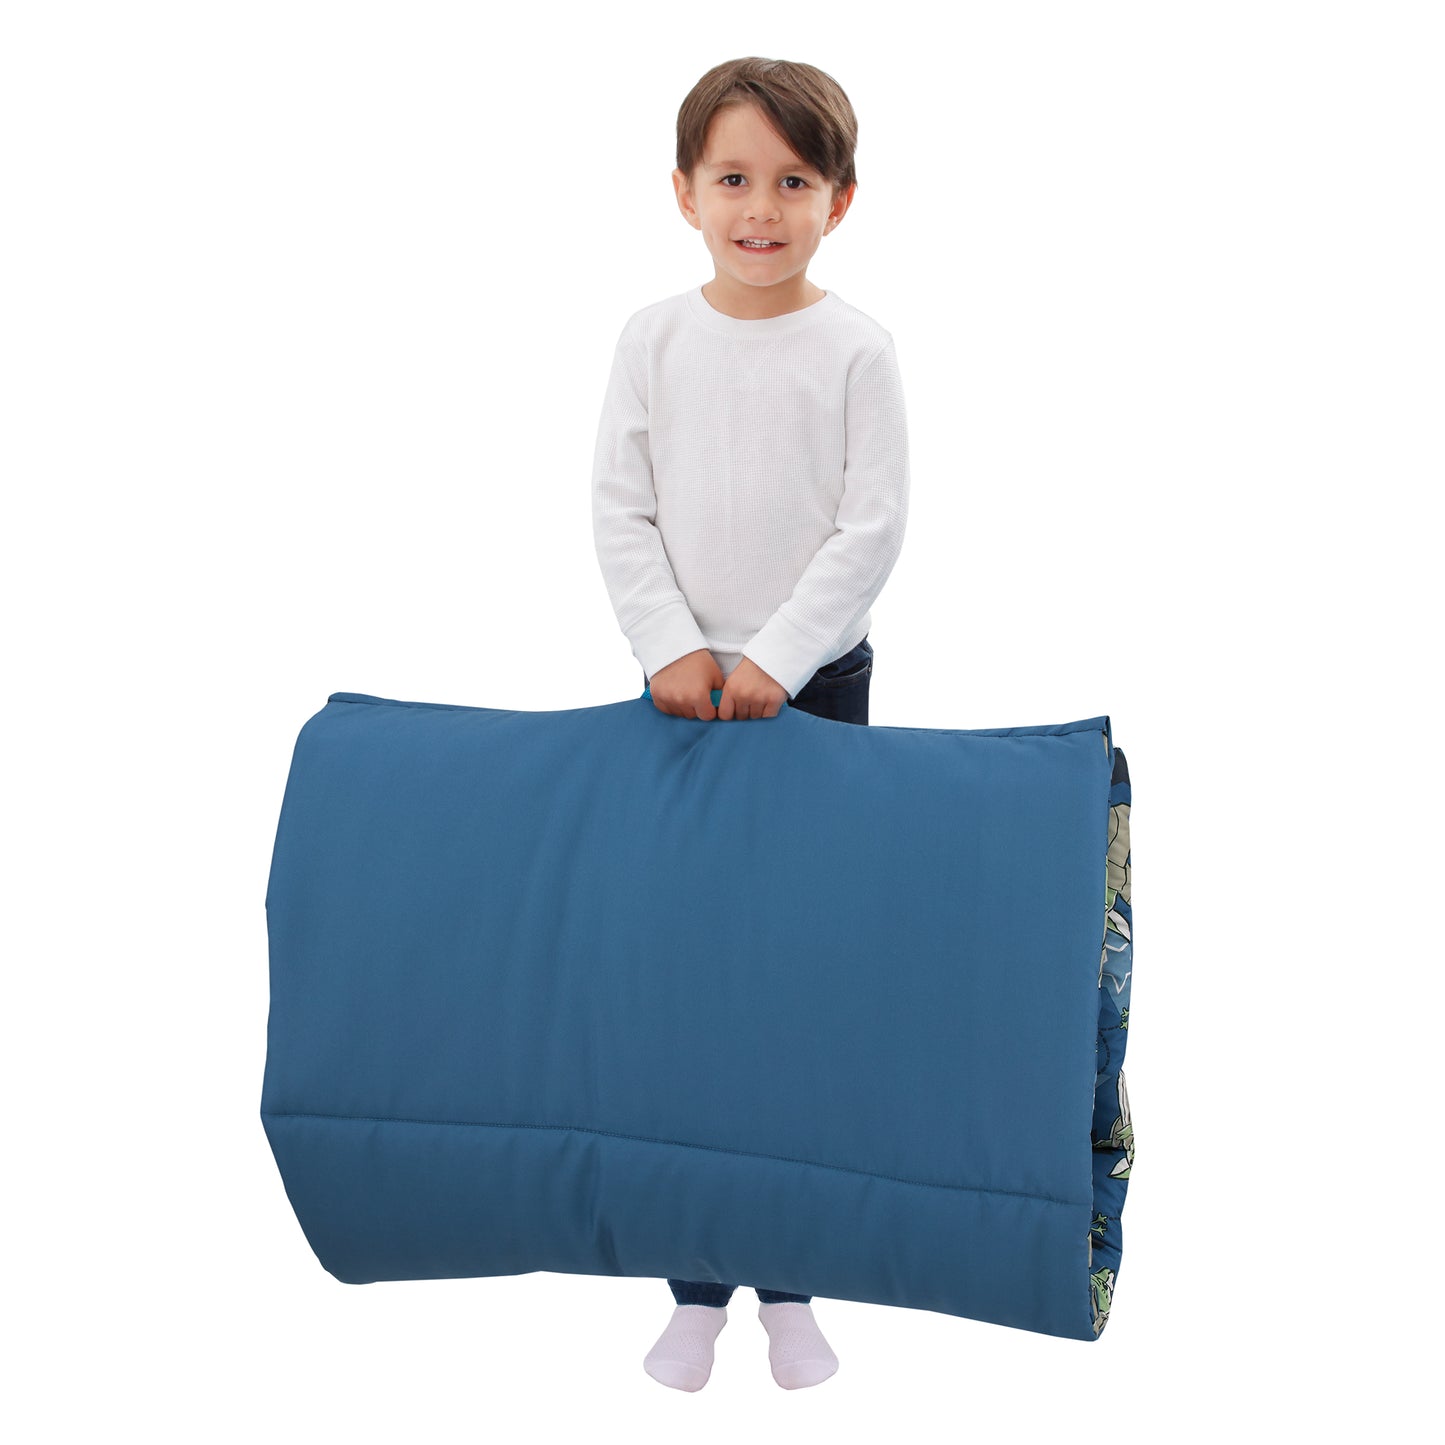 Star Wars The Child Cutest in the Galaxy Blue, Green and Gray Grogu, Hover Pod, and Stars Deluxe Easy Fold Toddler Nap Mat